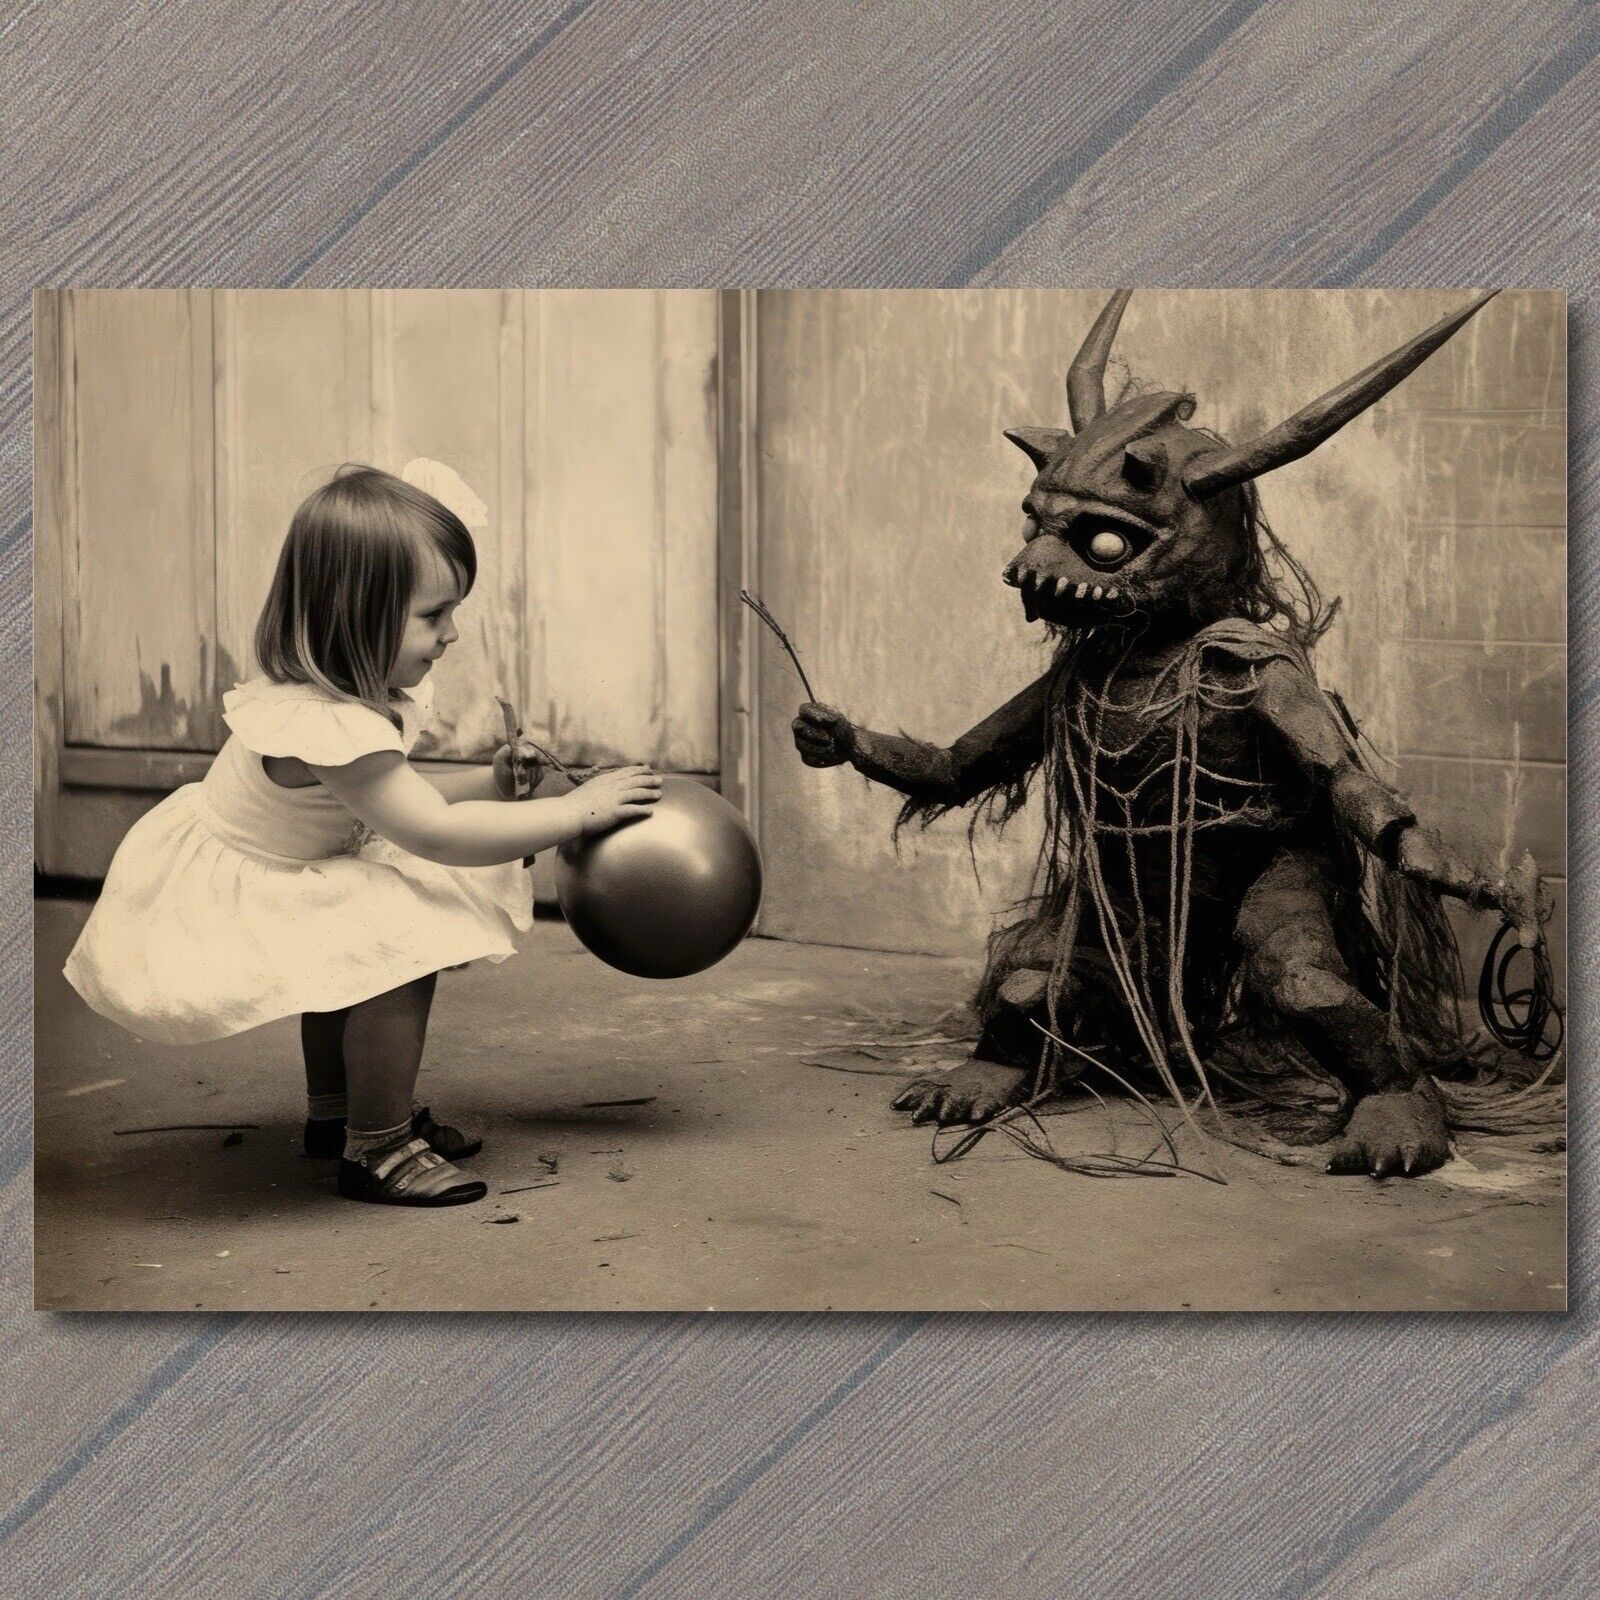 POSTCARD Weird Child Scary Vintage Halloween Monster Cult Unusual Unreal